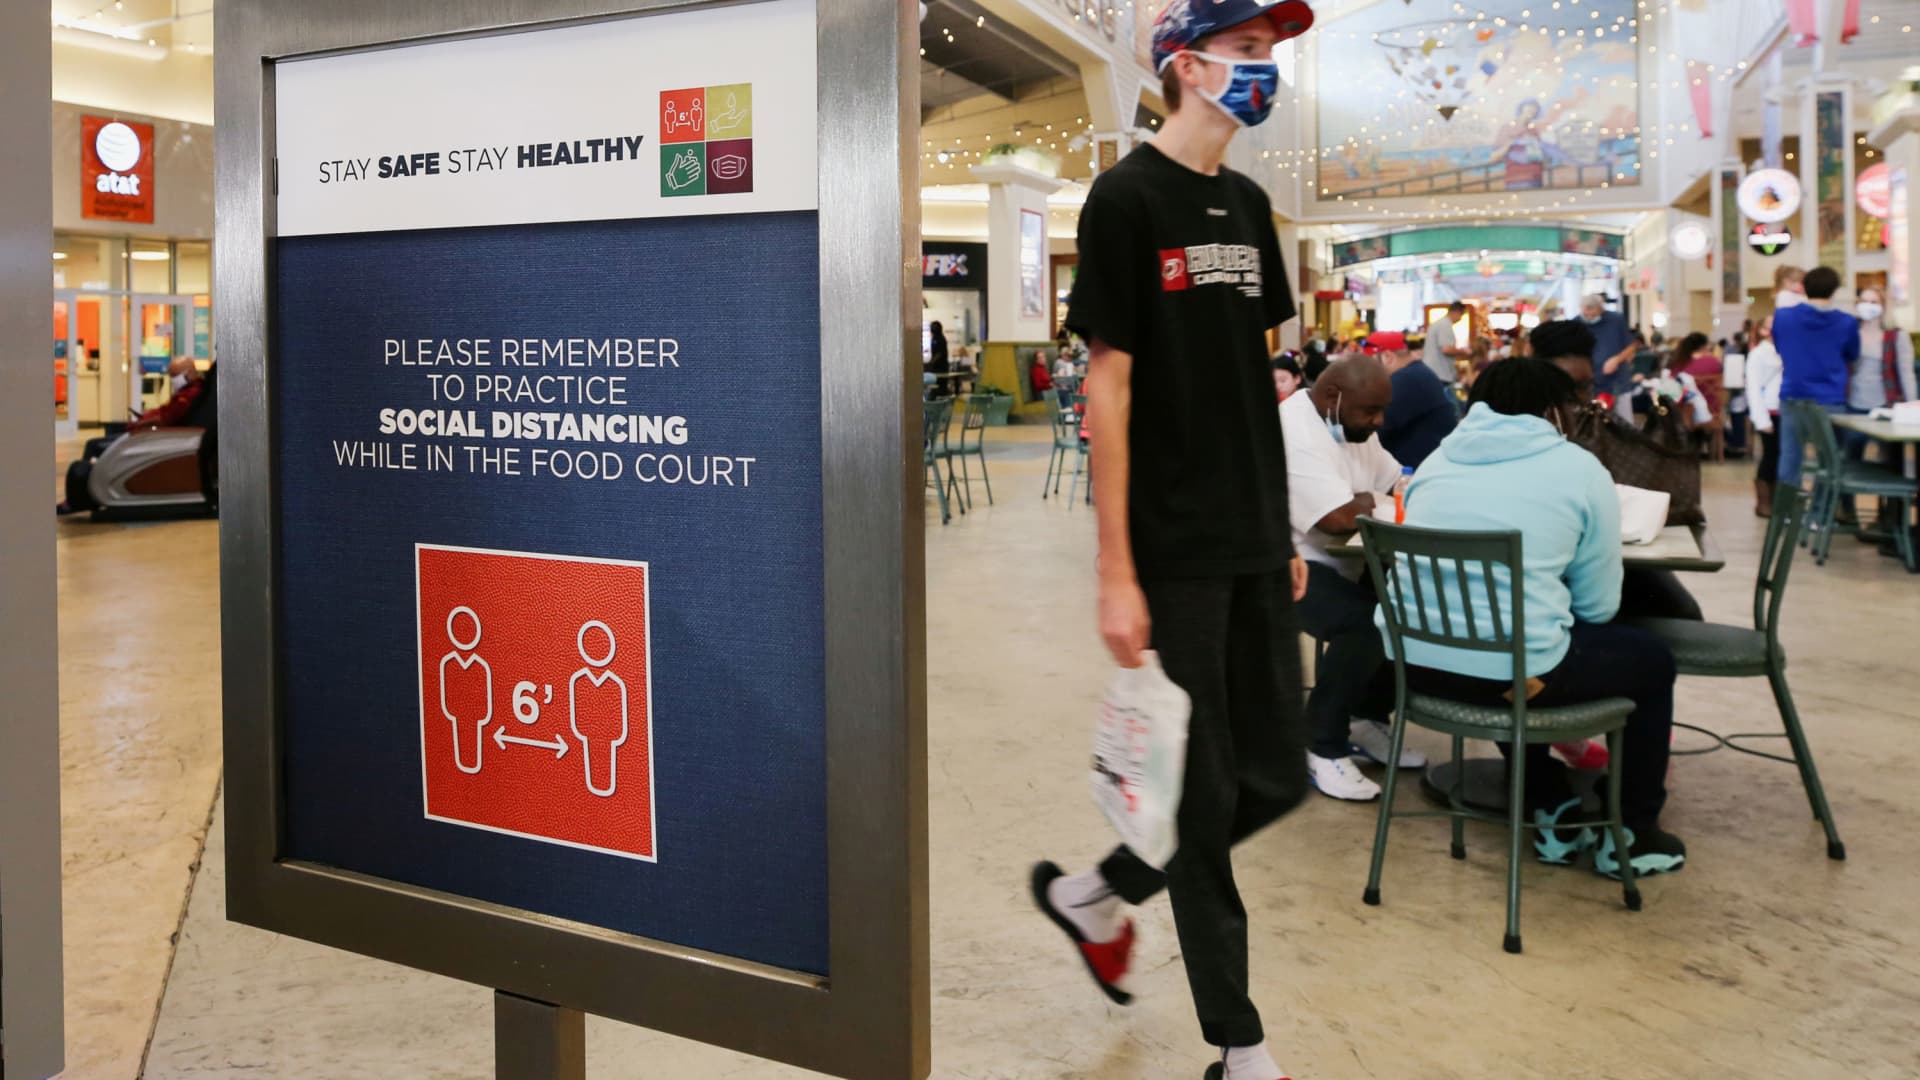 A shopper wearing a protective mask passes a social distancing sign at Coastal Grand Mall on Black Friday, in Myrtle Beach, South Carolina, November 27, 2020.